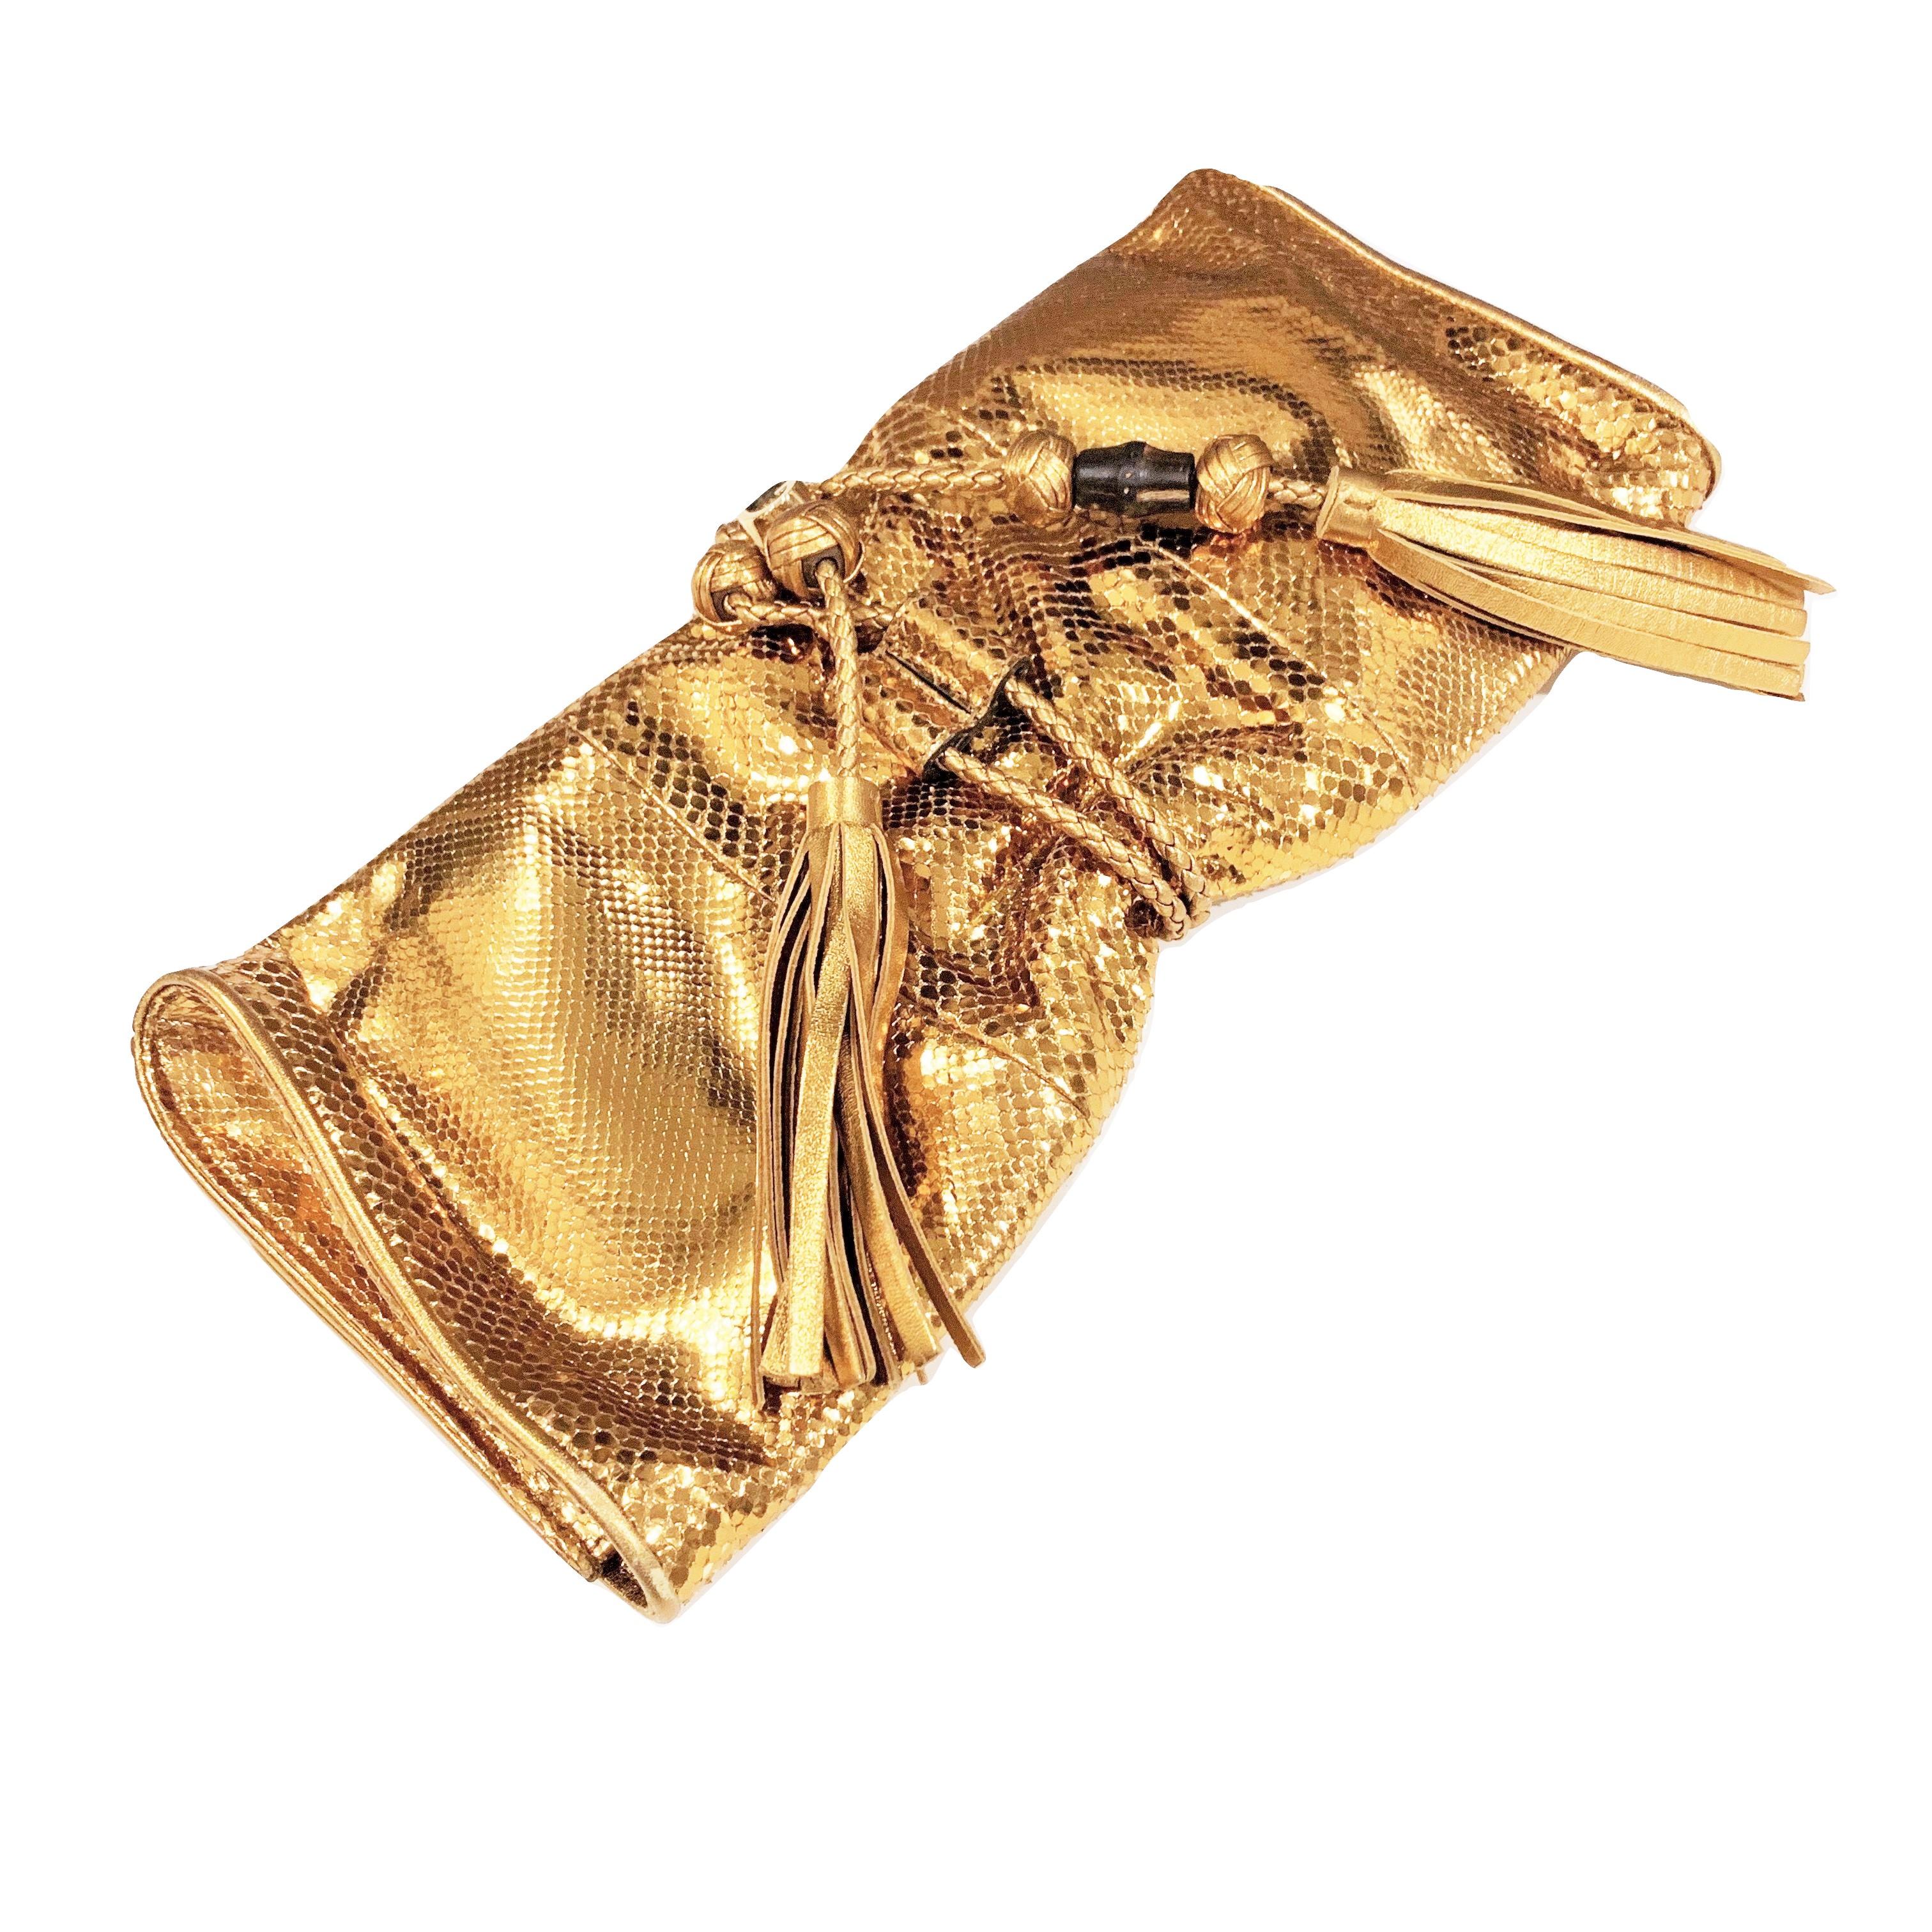 New Gucci Malika Large Python Clutch Bag in Gold As Seen on J-Lo & Kim 5